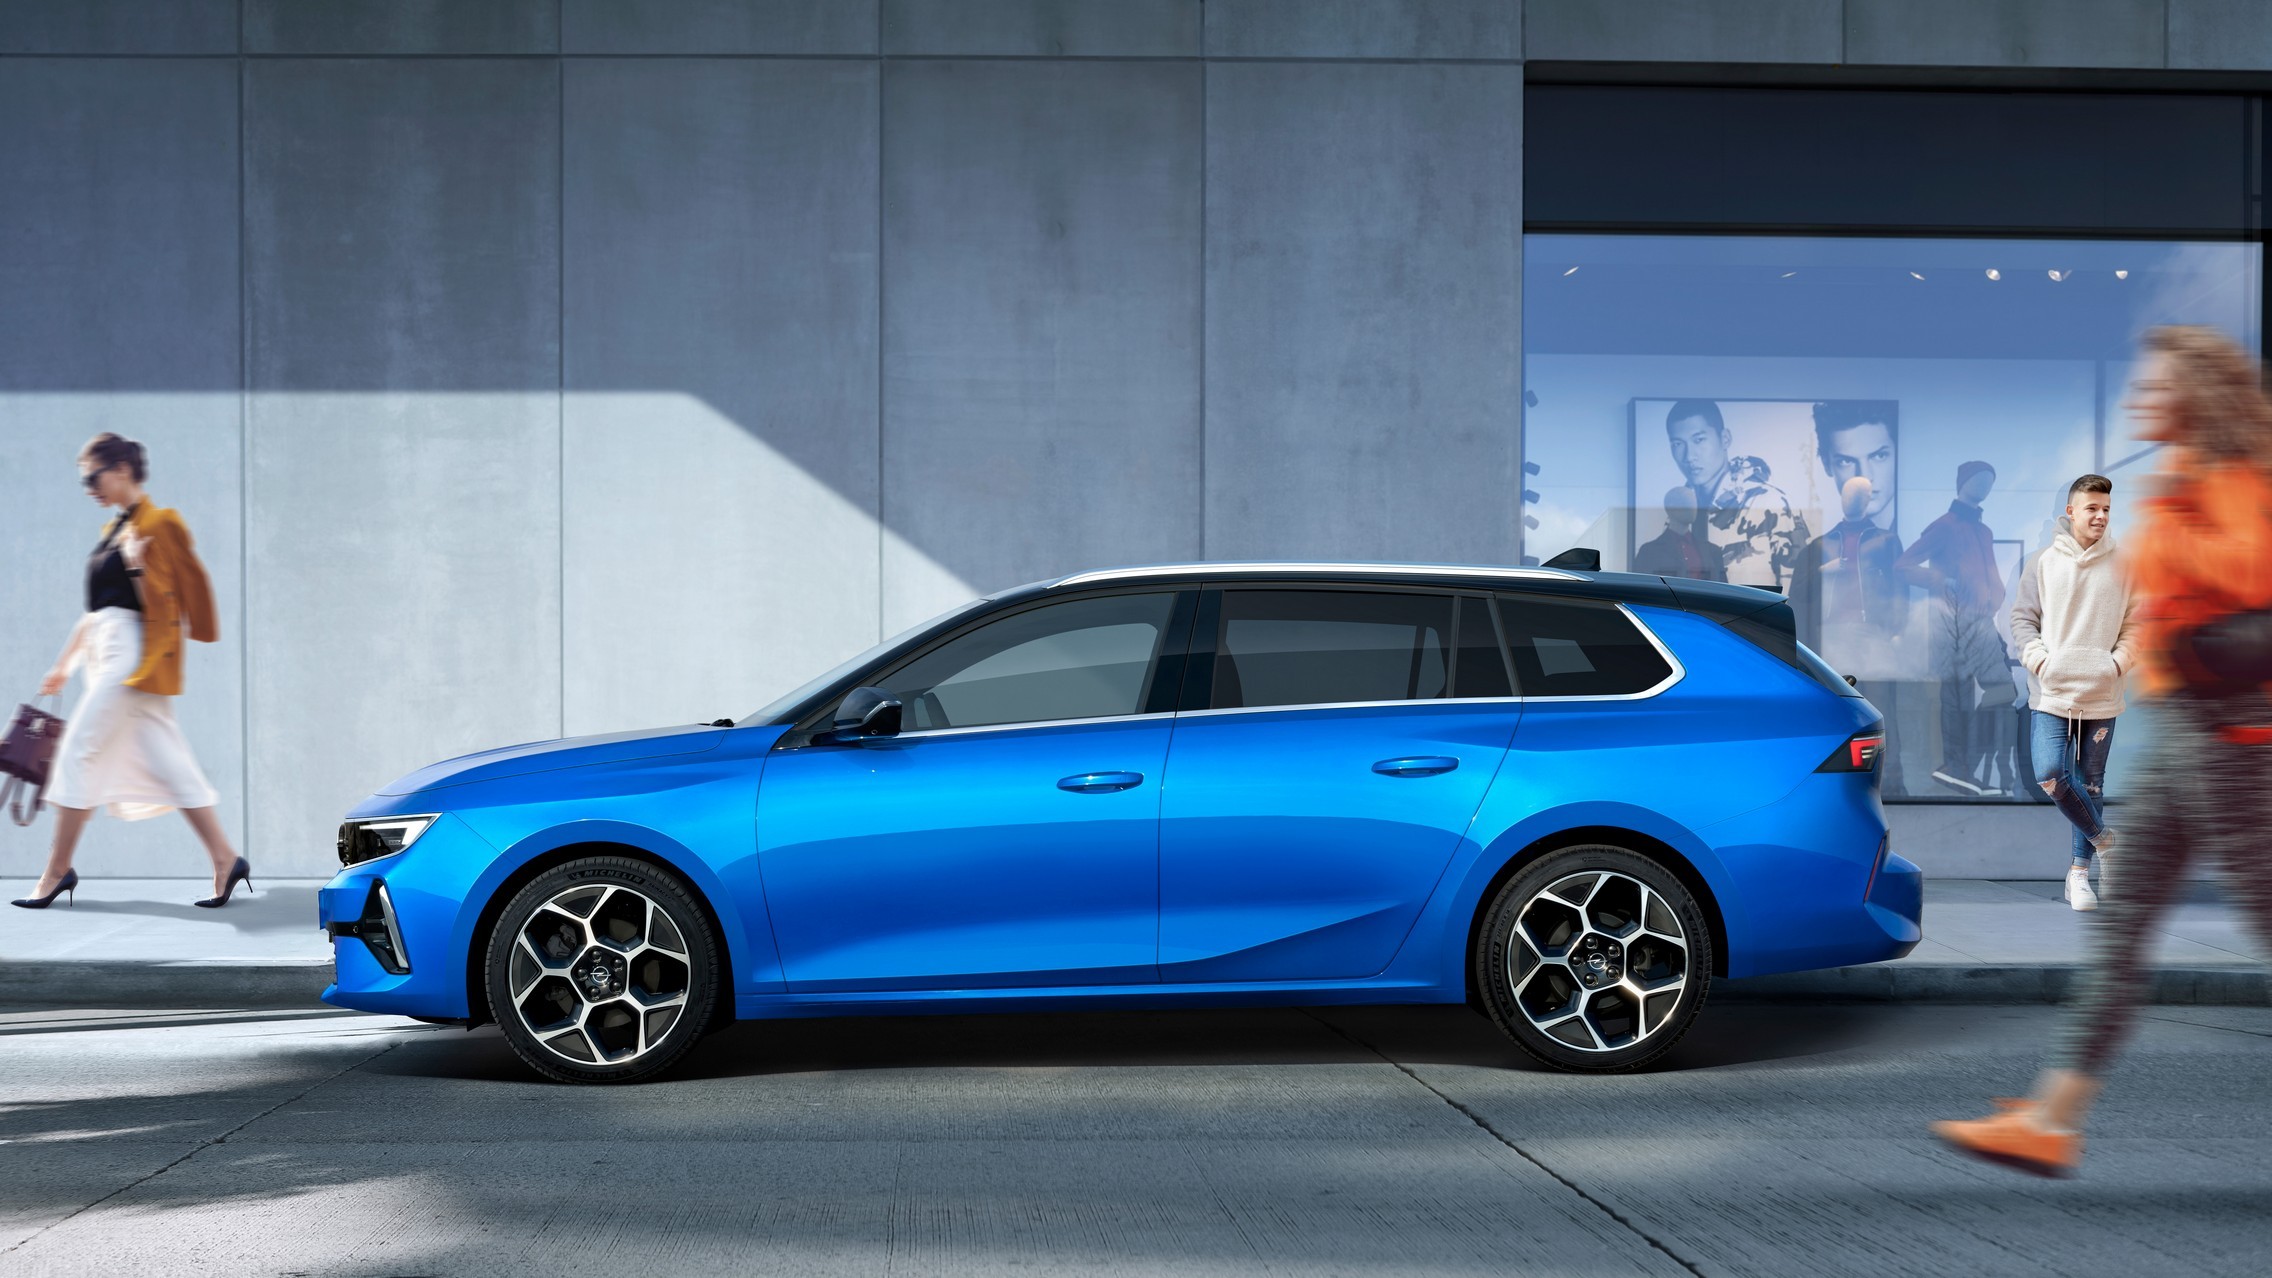 New Opel Astra Sports Tourer Is Purely Designed As ICE and Electrified ...